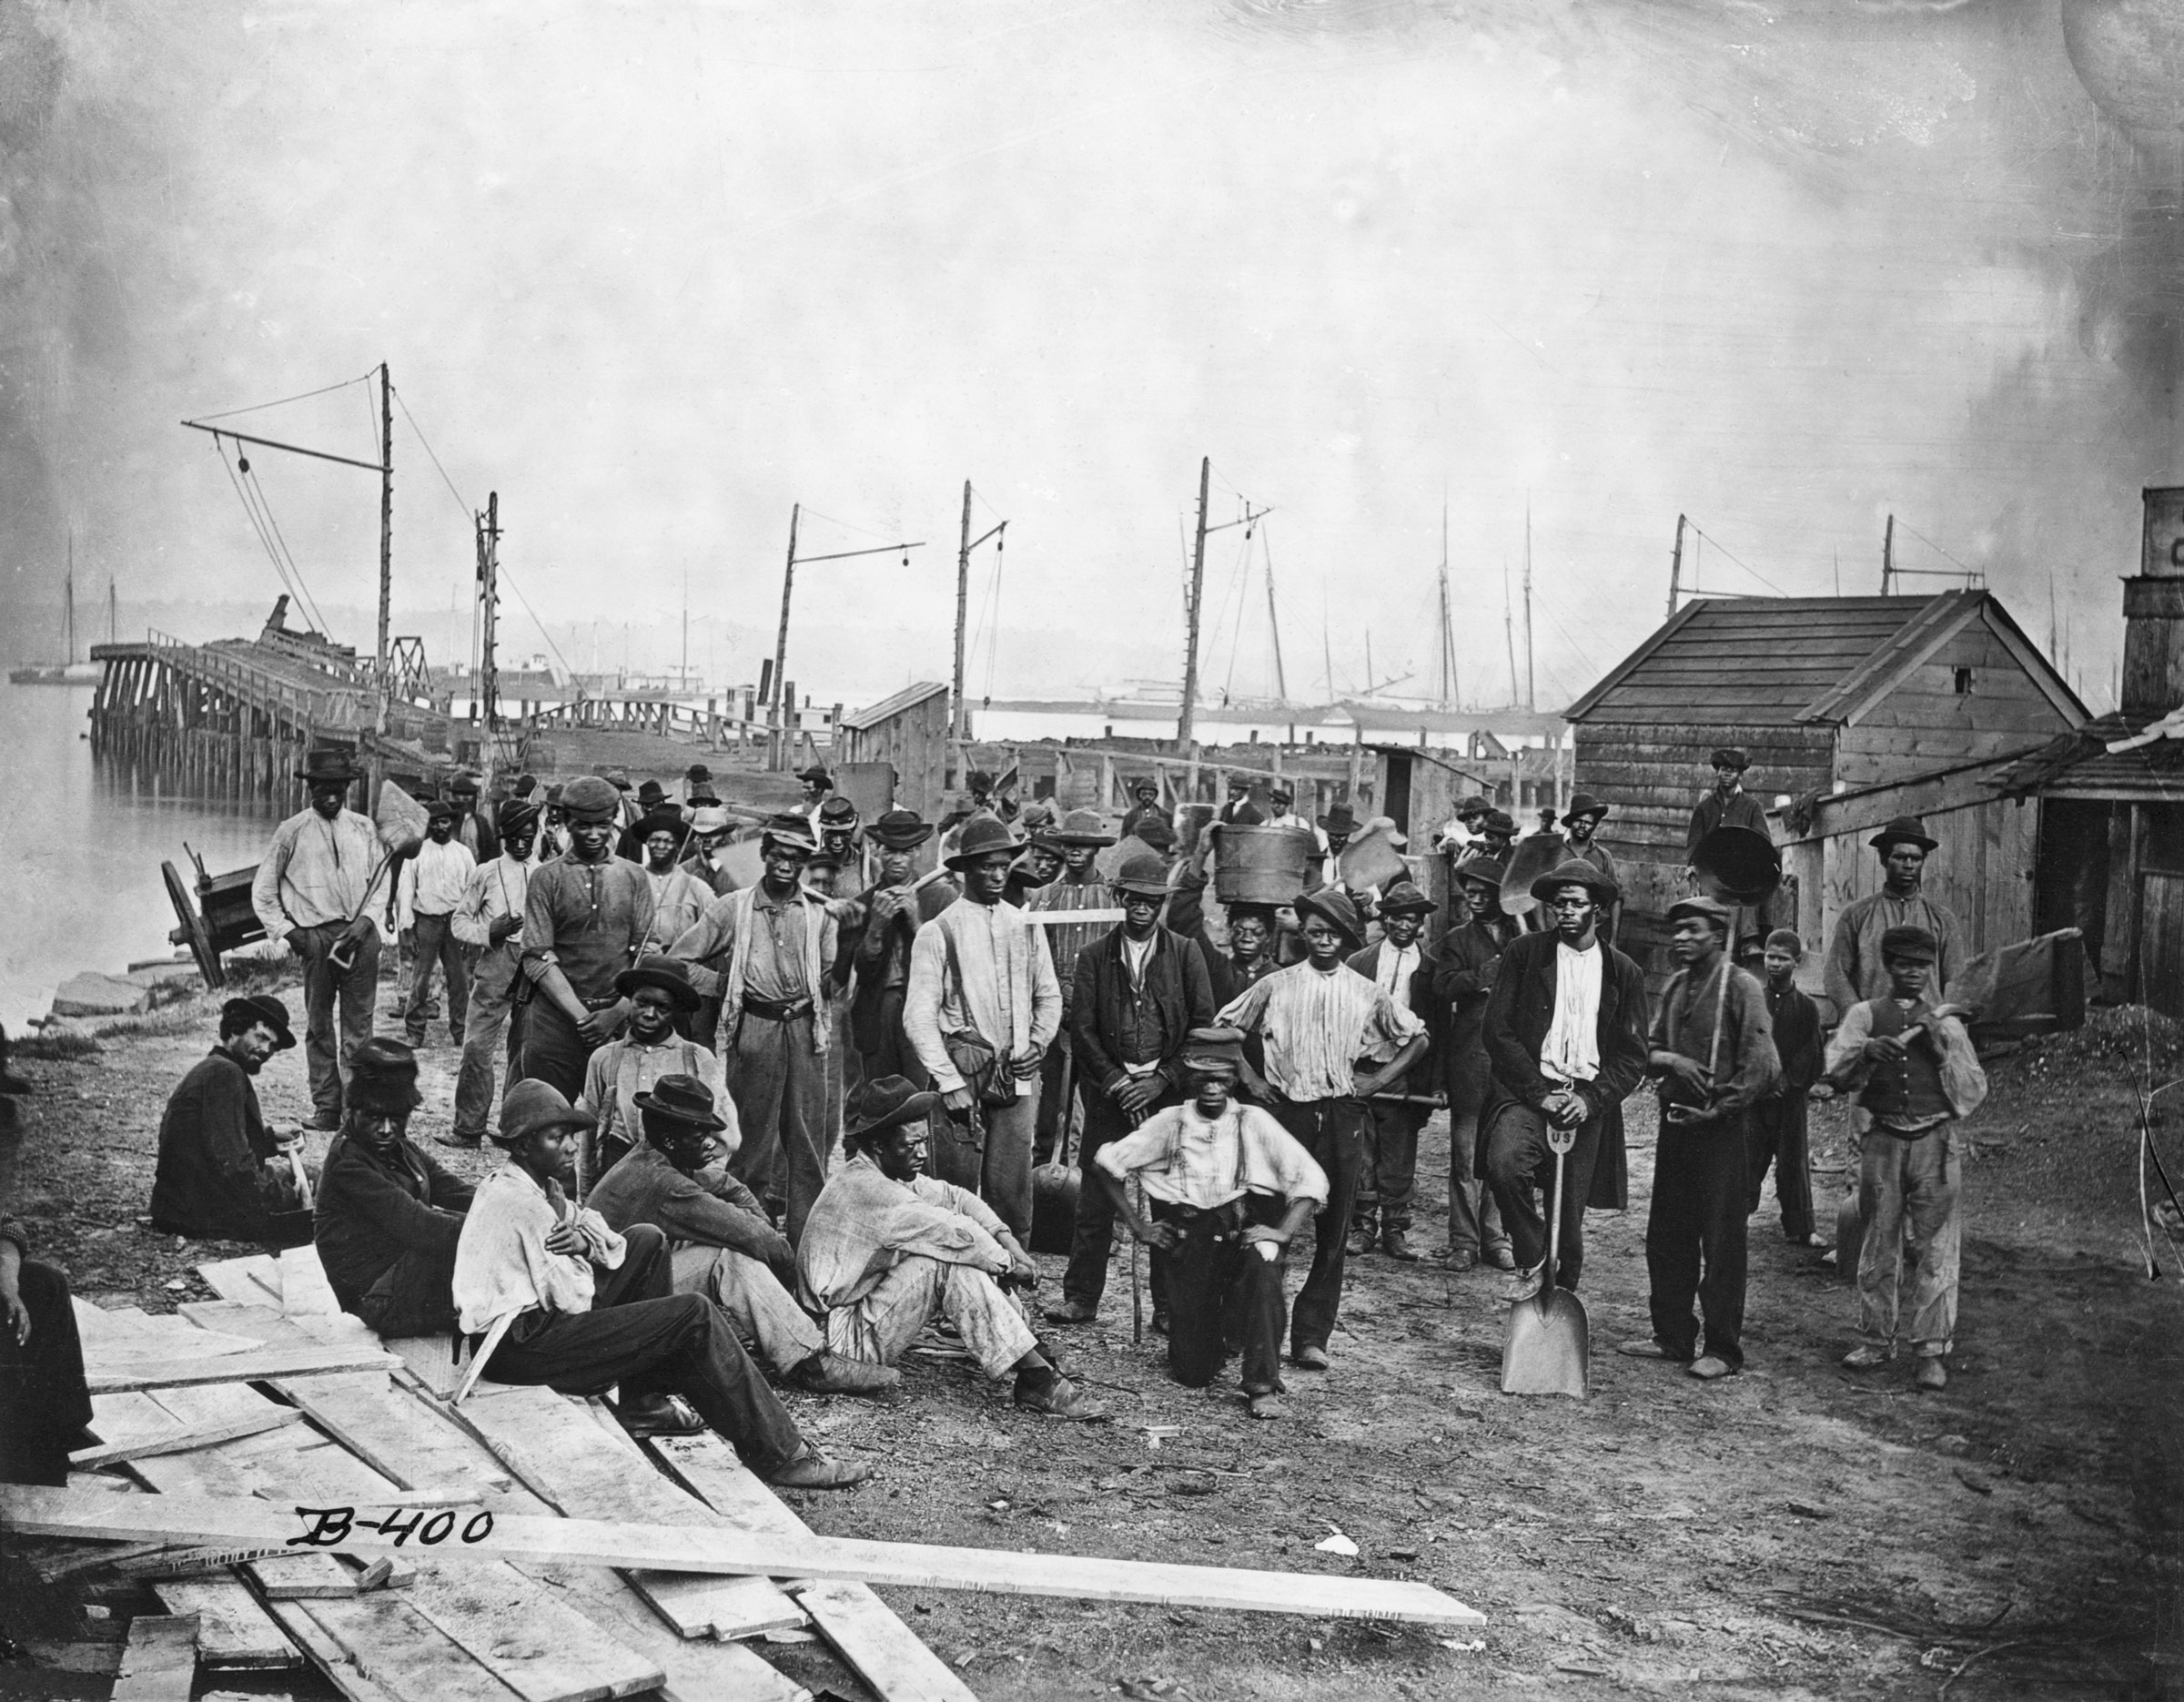 A group of freed African American slaves along a wharf during the United States Civil War. (Bettmann/Getty Images)